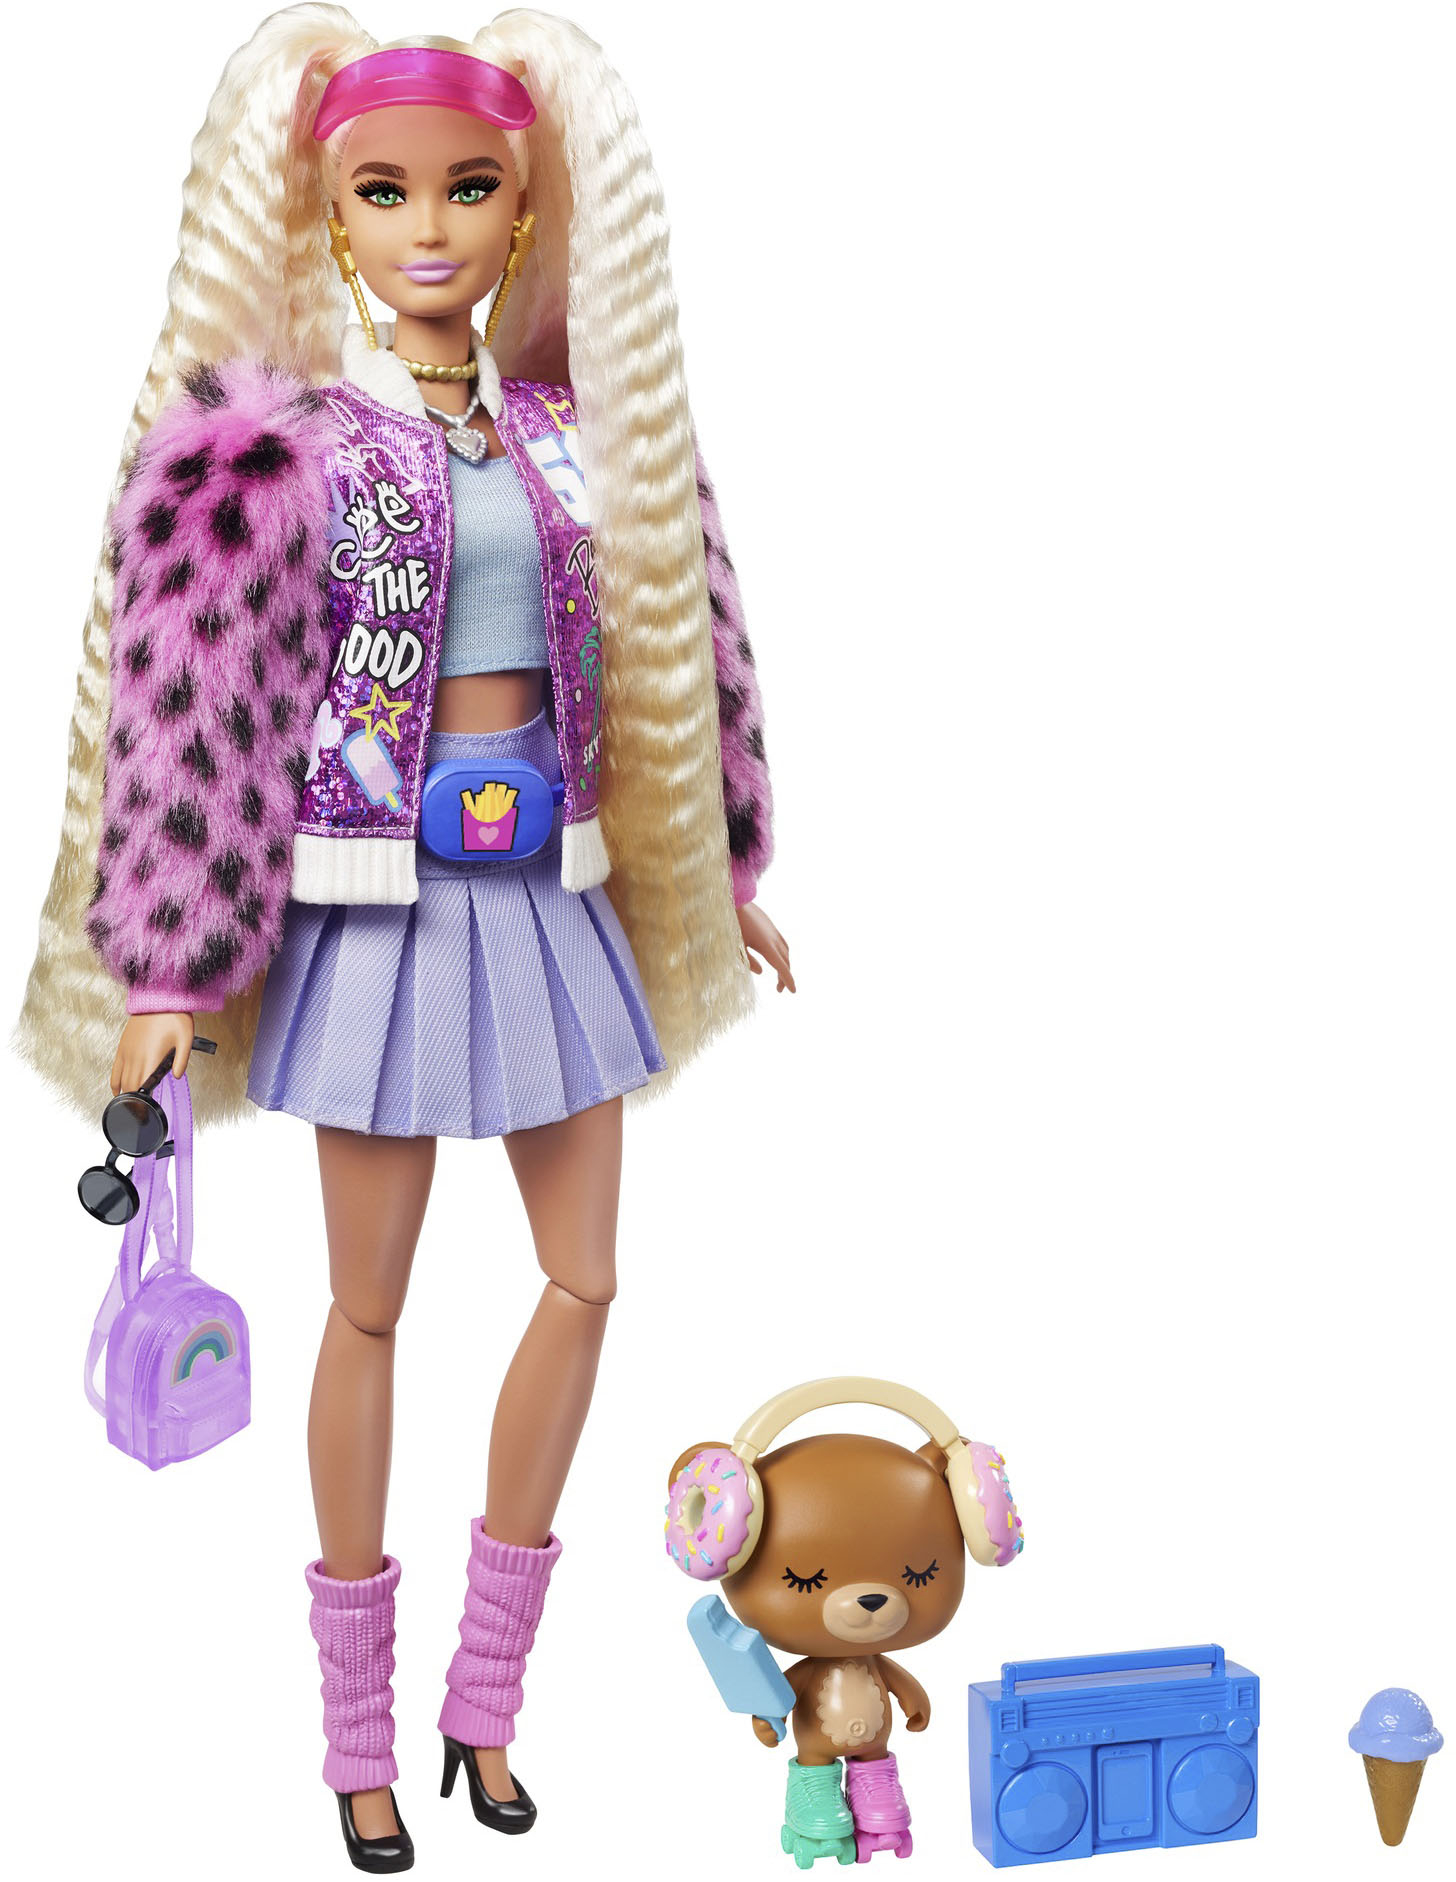 metálico licencia cartel Barbie Extra Doll Blonde with Pigtails GYJ77 - Best Buy